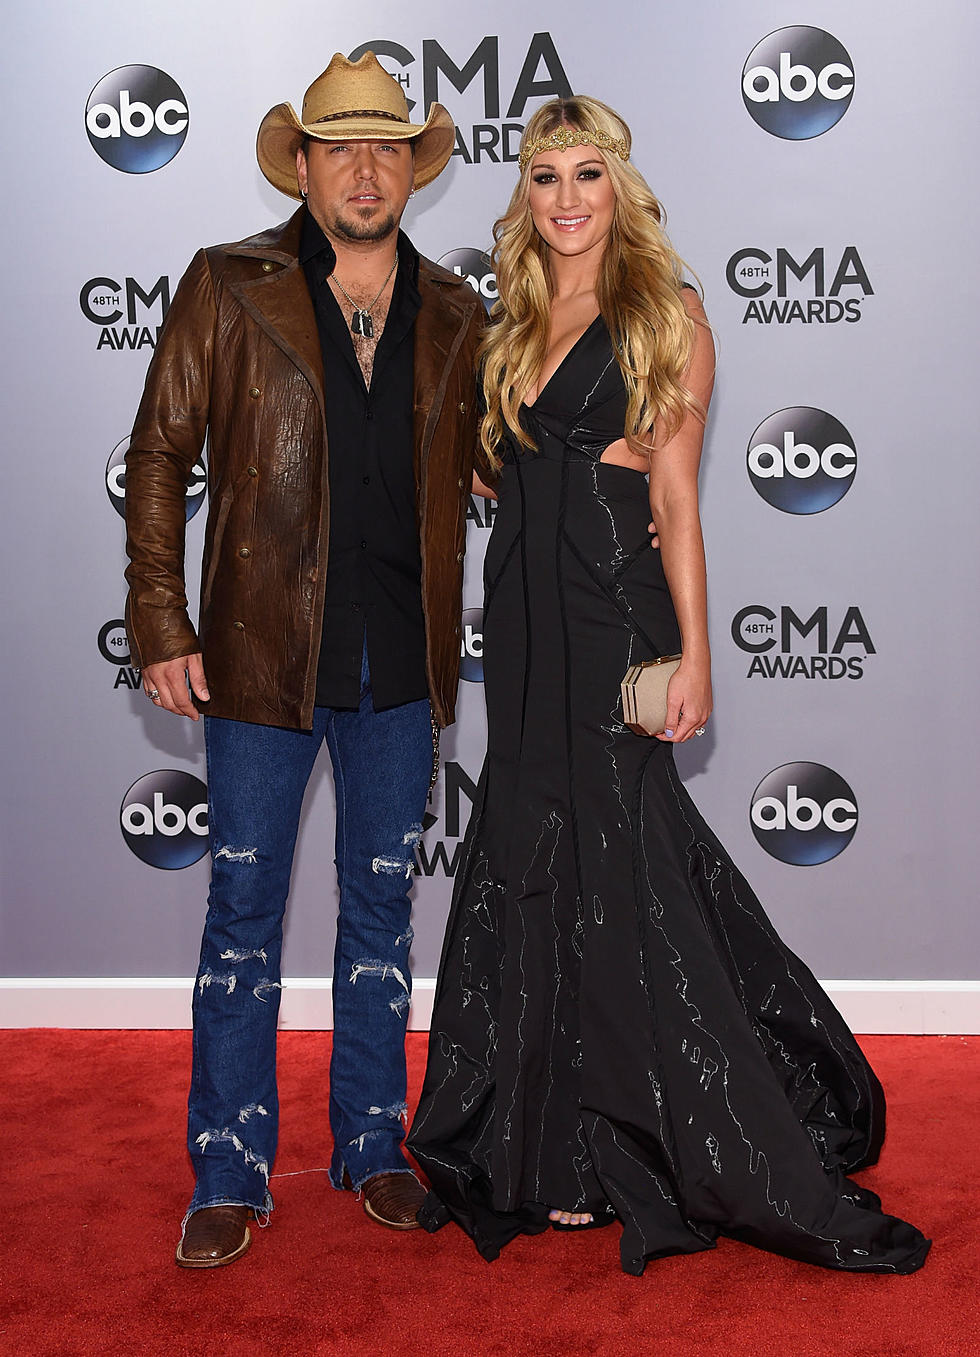 My CMA Awards Recap…But More Like A Play-By-Play